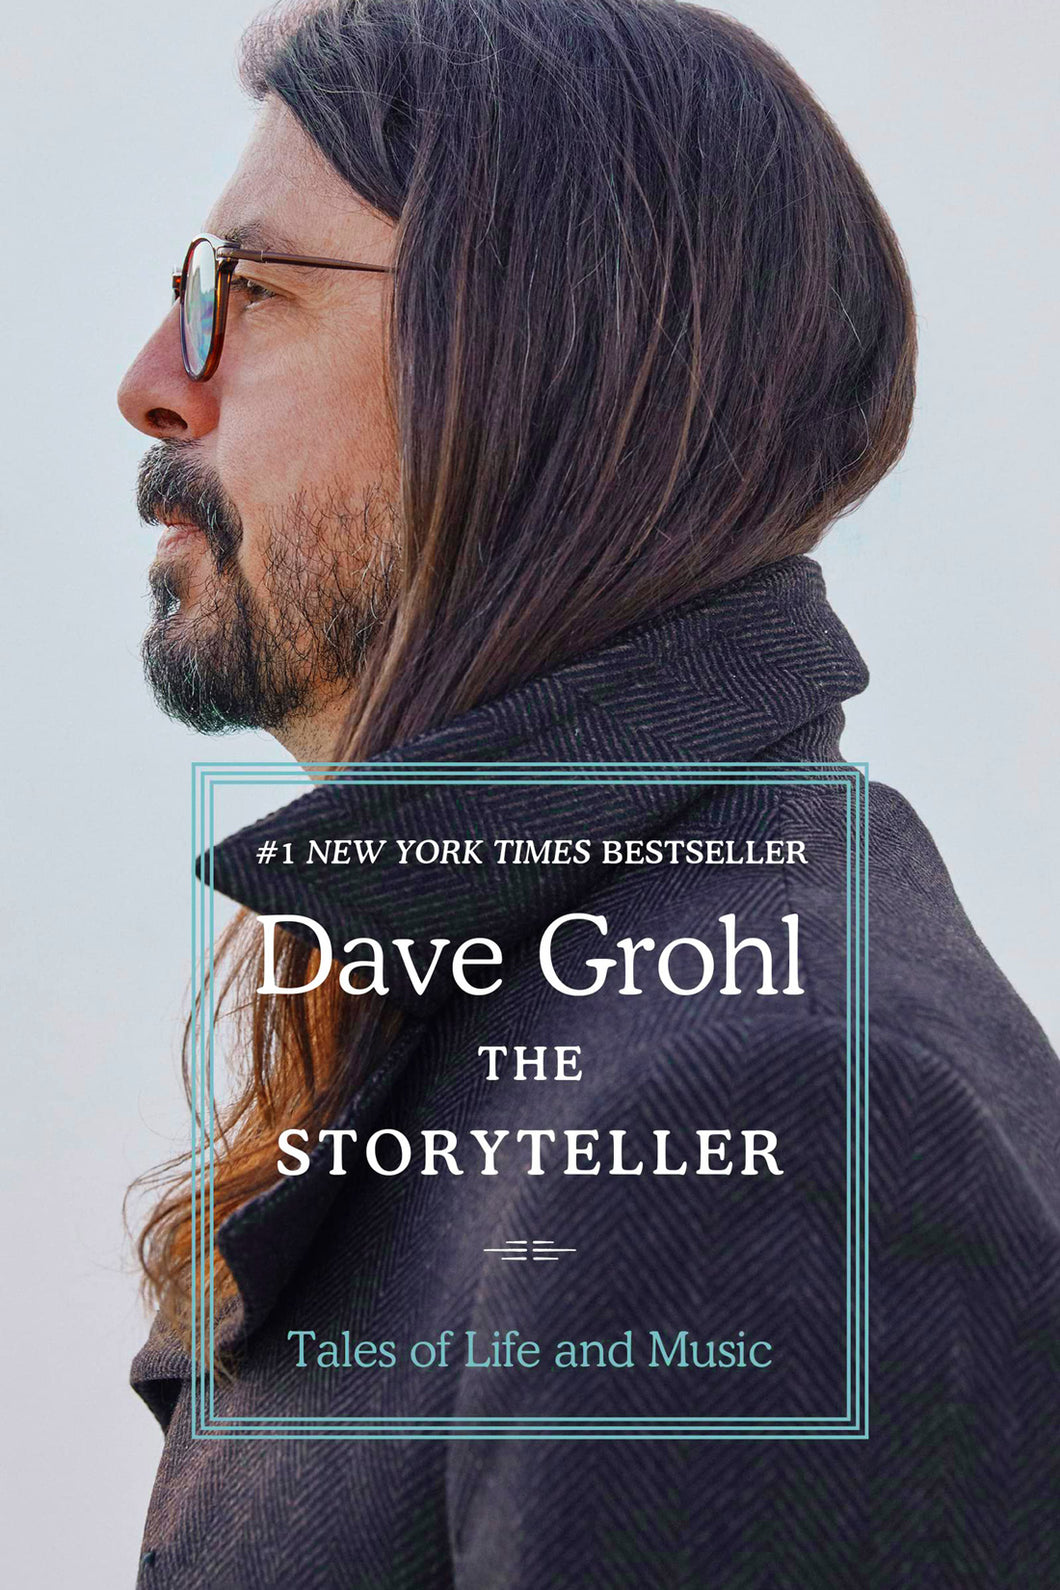 The Storyteller: Tales of Life and Music by Dave Grohl / BOOK OR BUNDLE - Starting at $22!